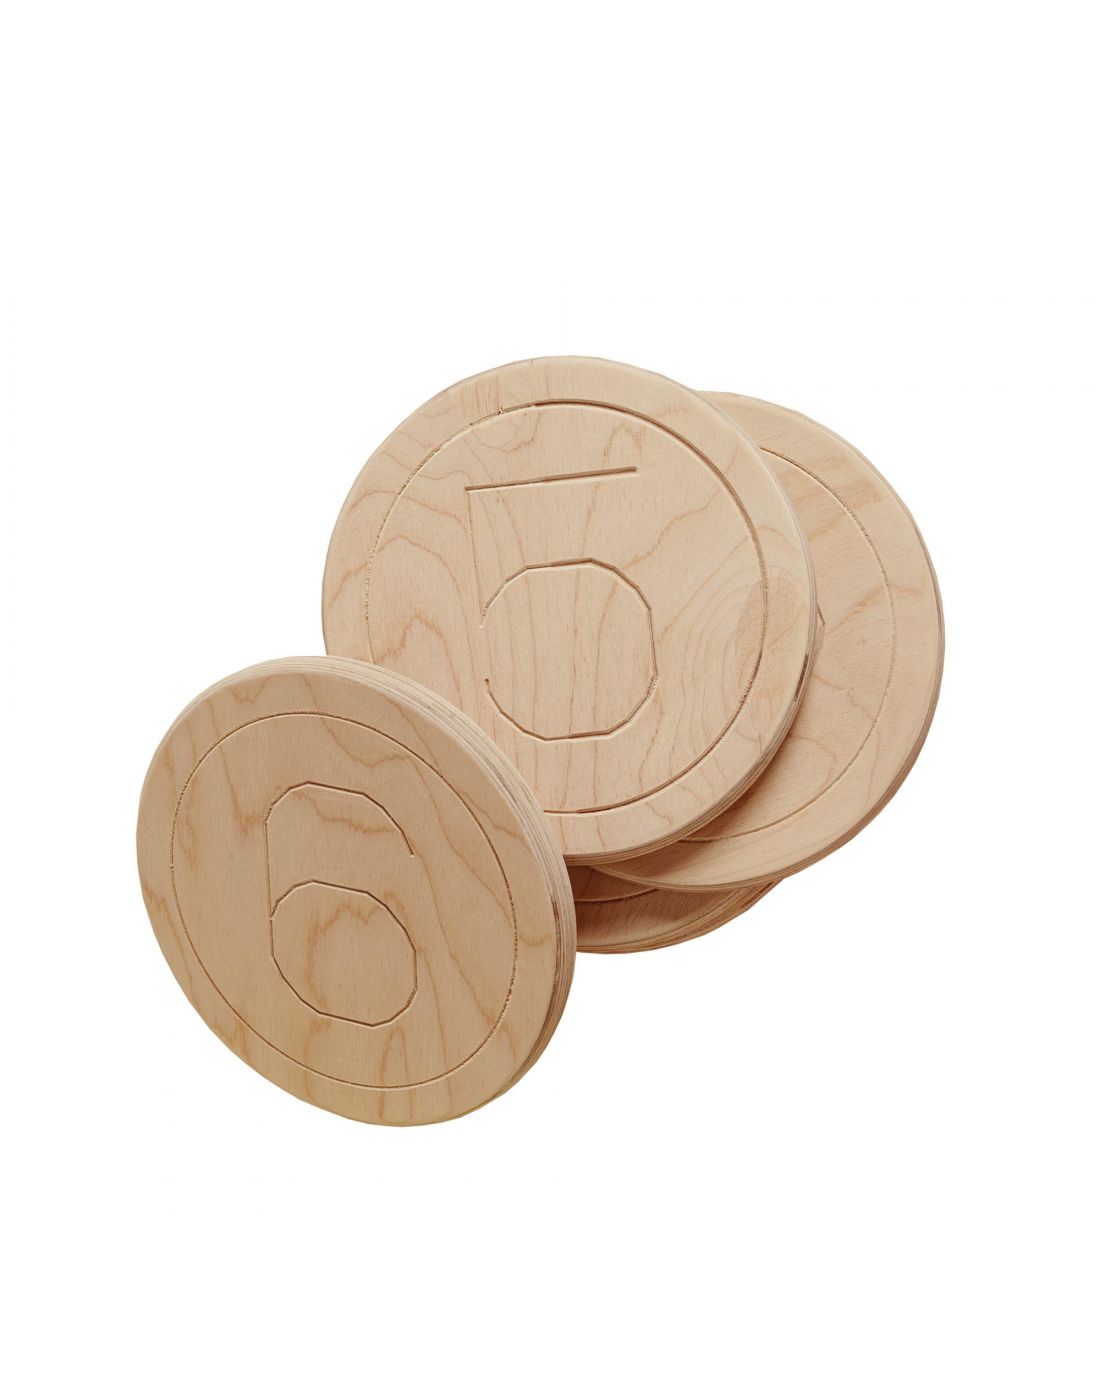 Wudd Wooden Balance Beams with Educational Circled Numbers